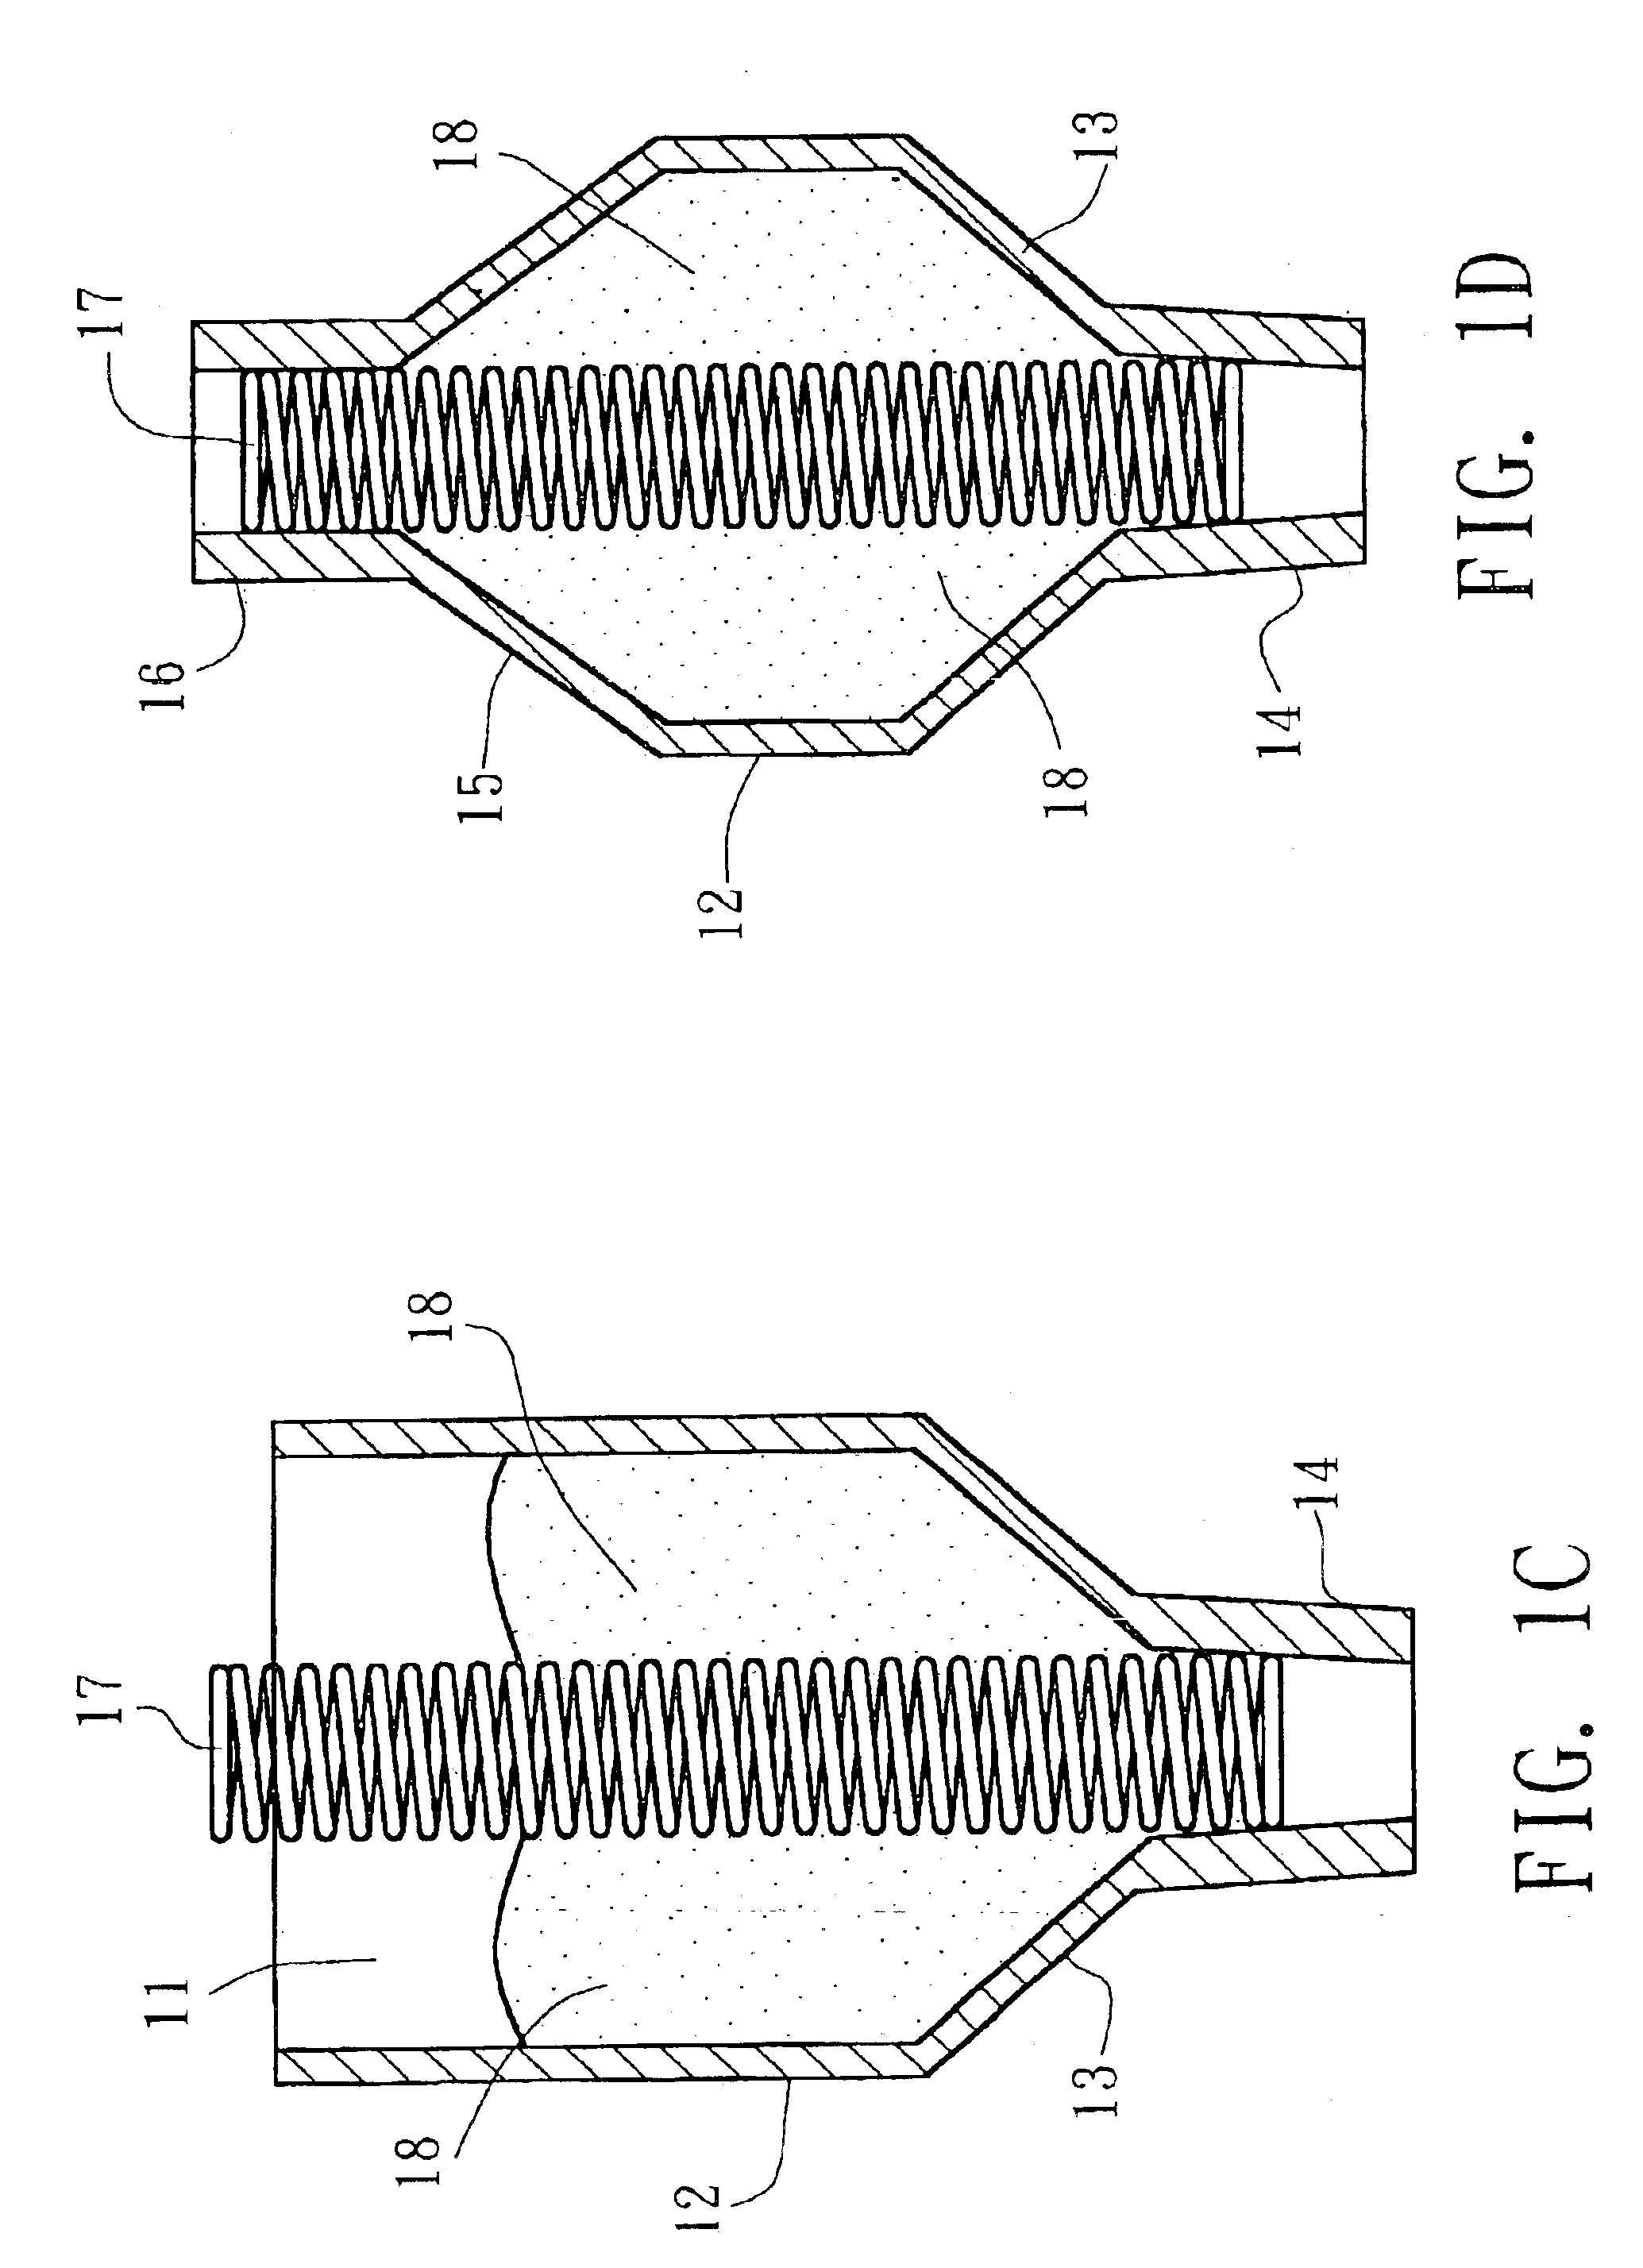 Manufacturing method of a muffler assembly